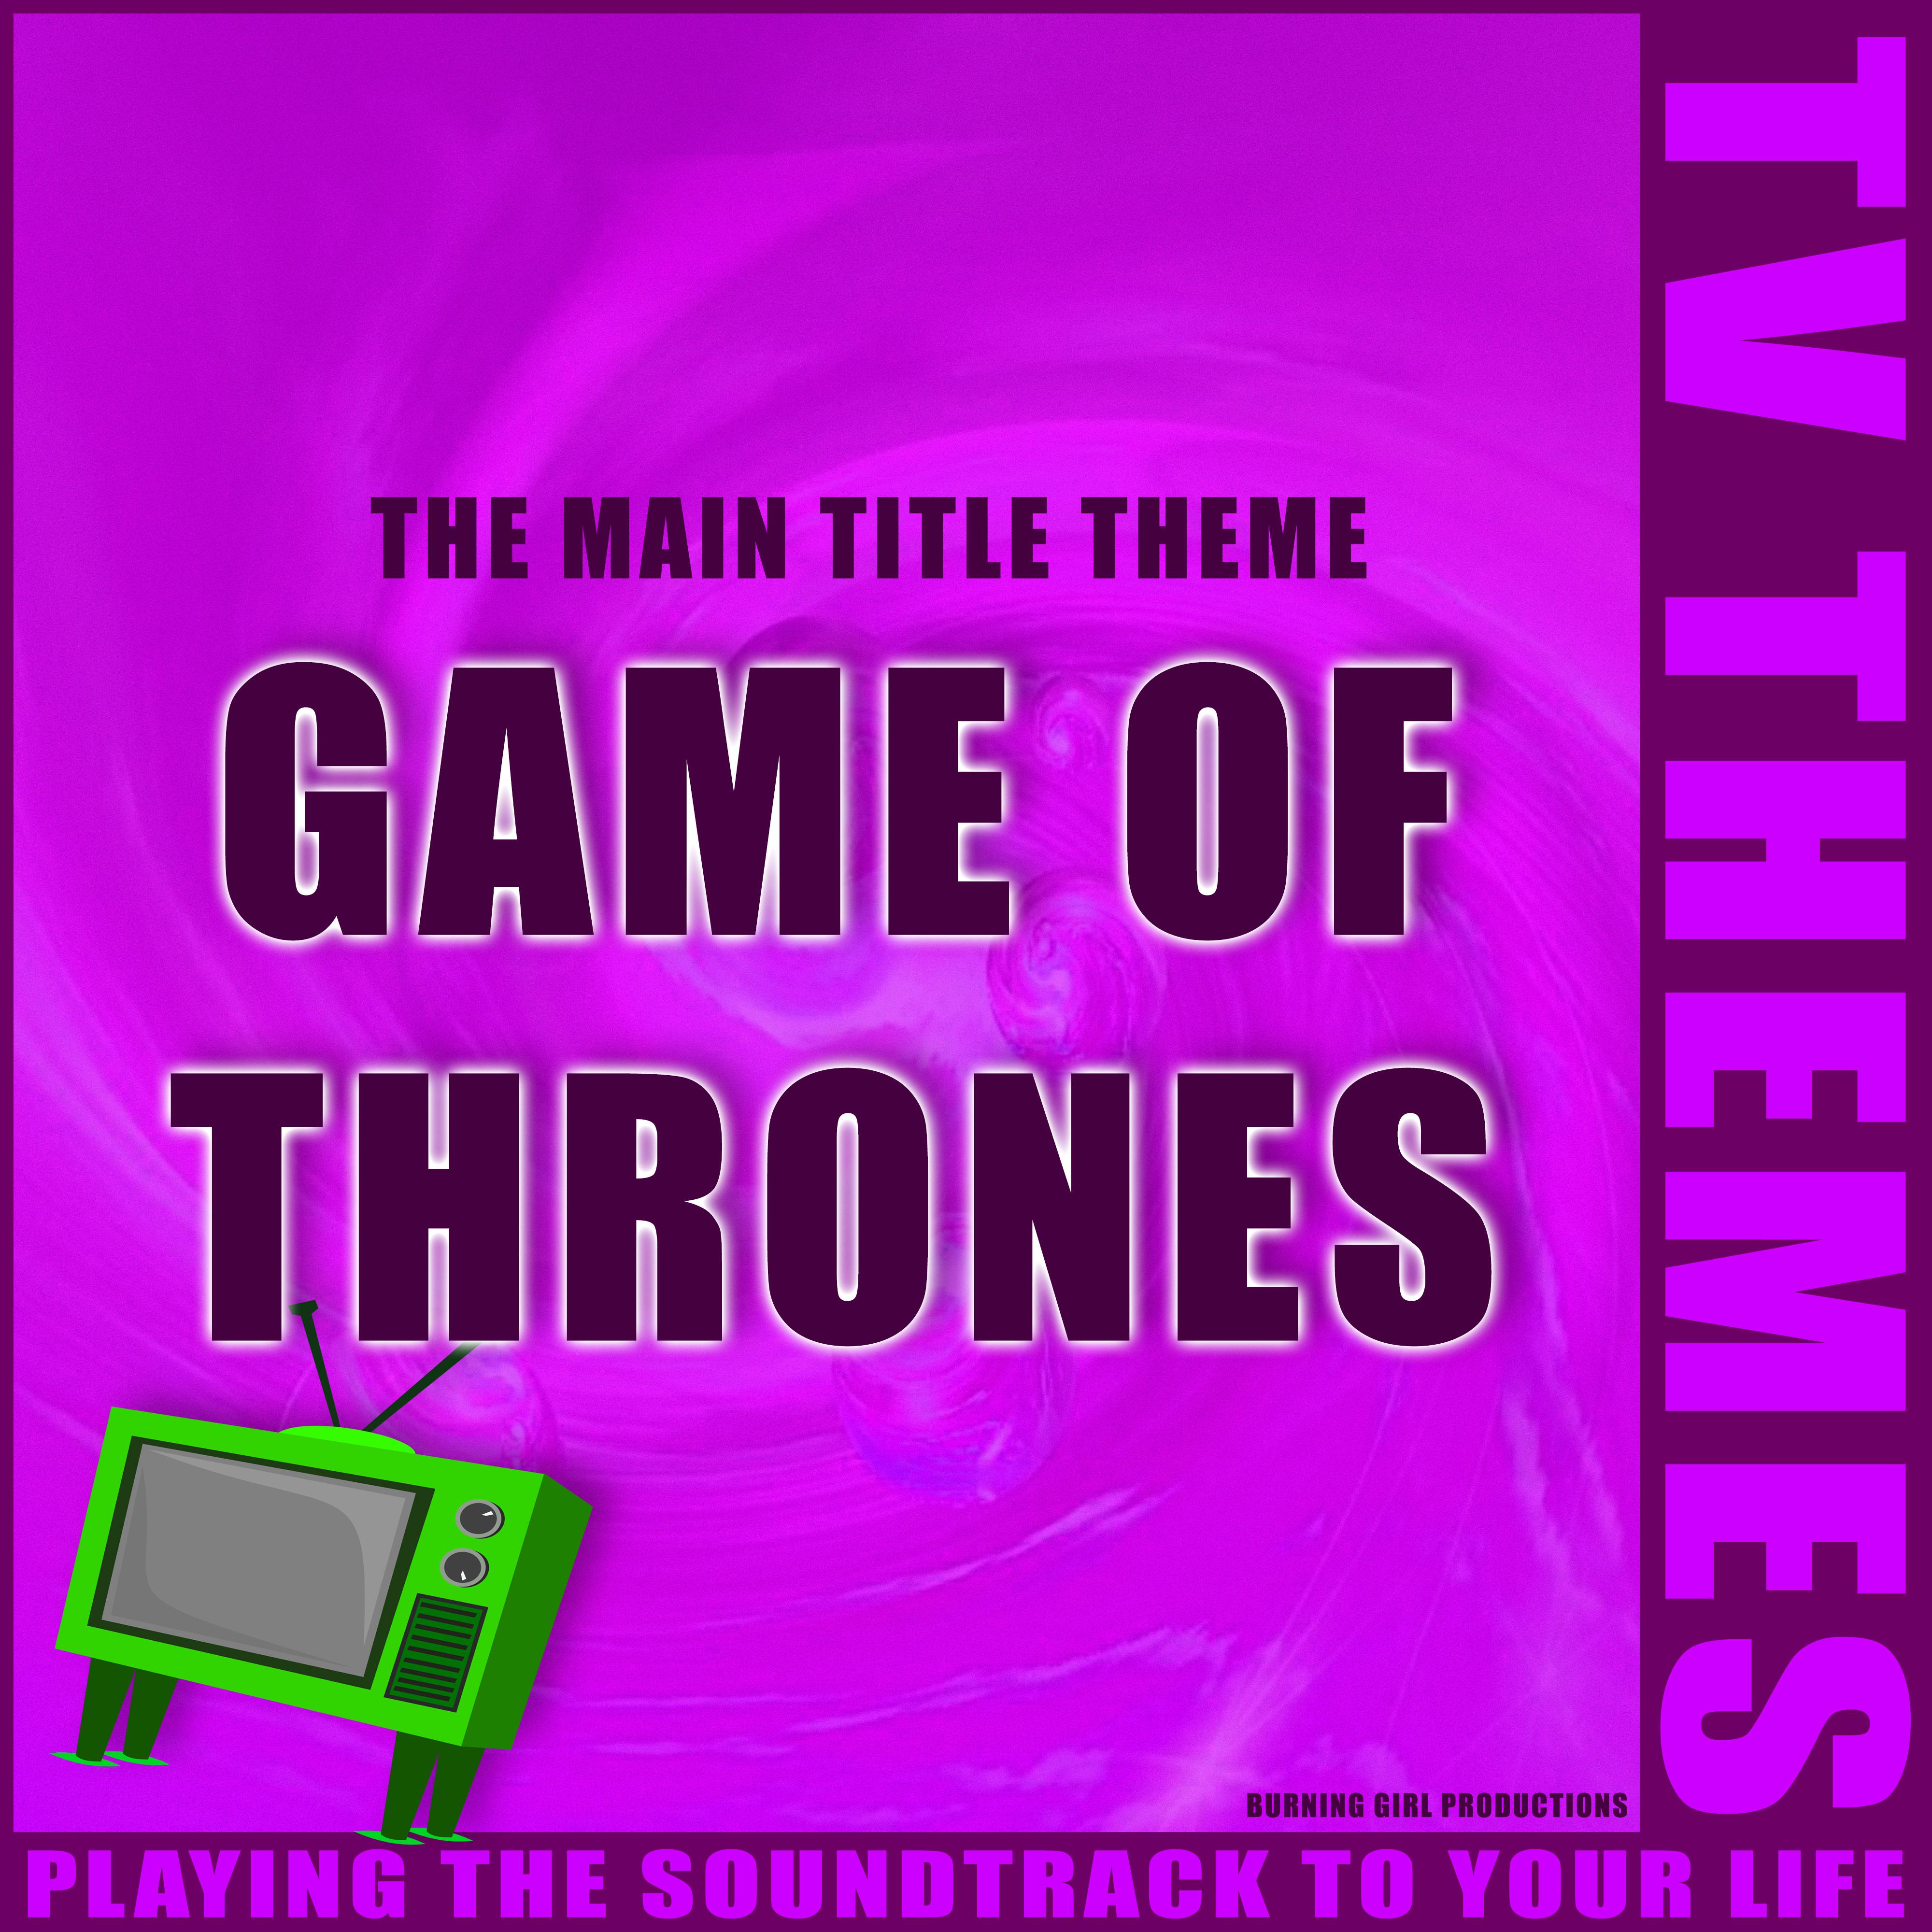 The Main Title Theme - Game of Thrones